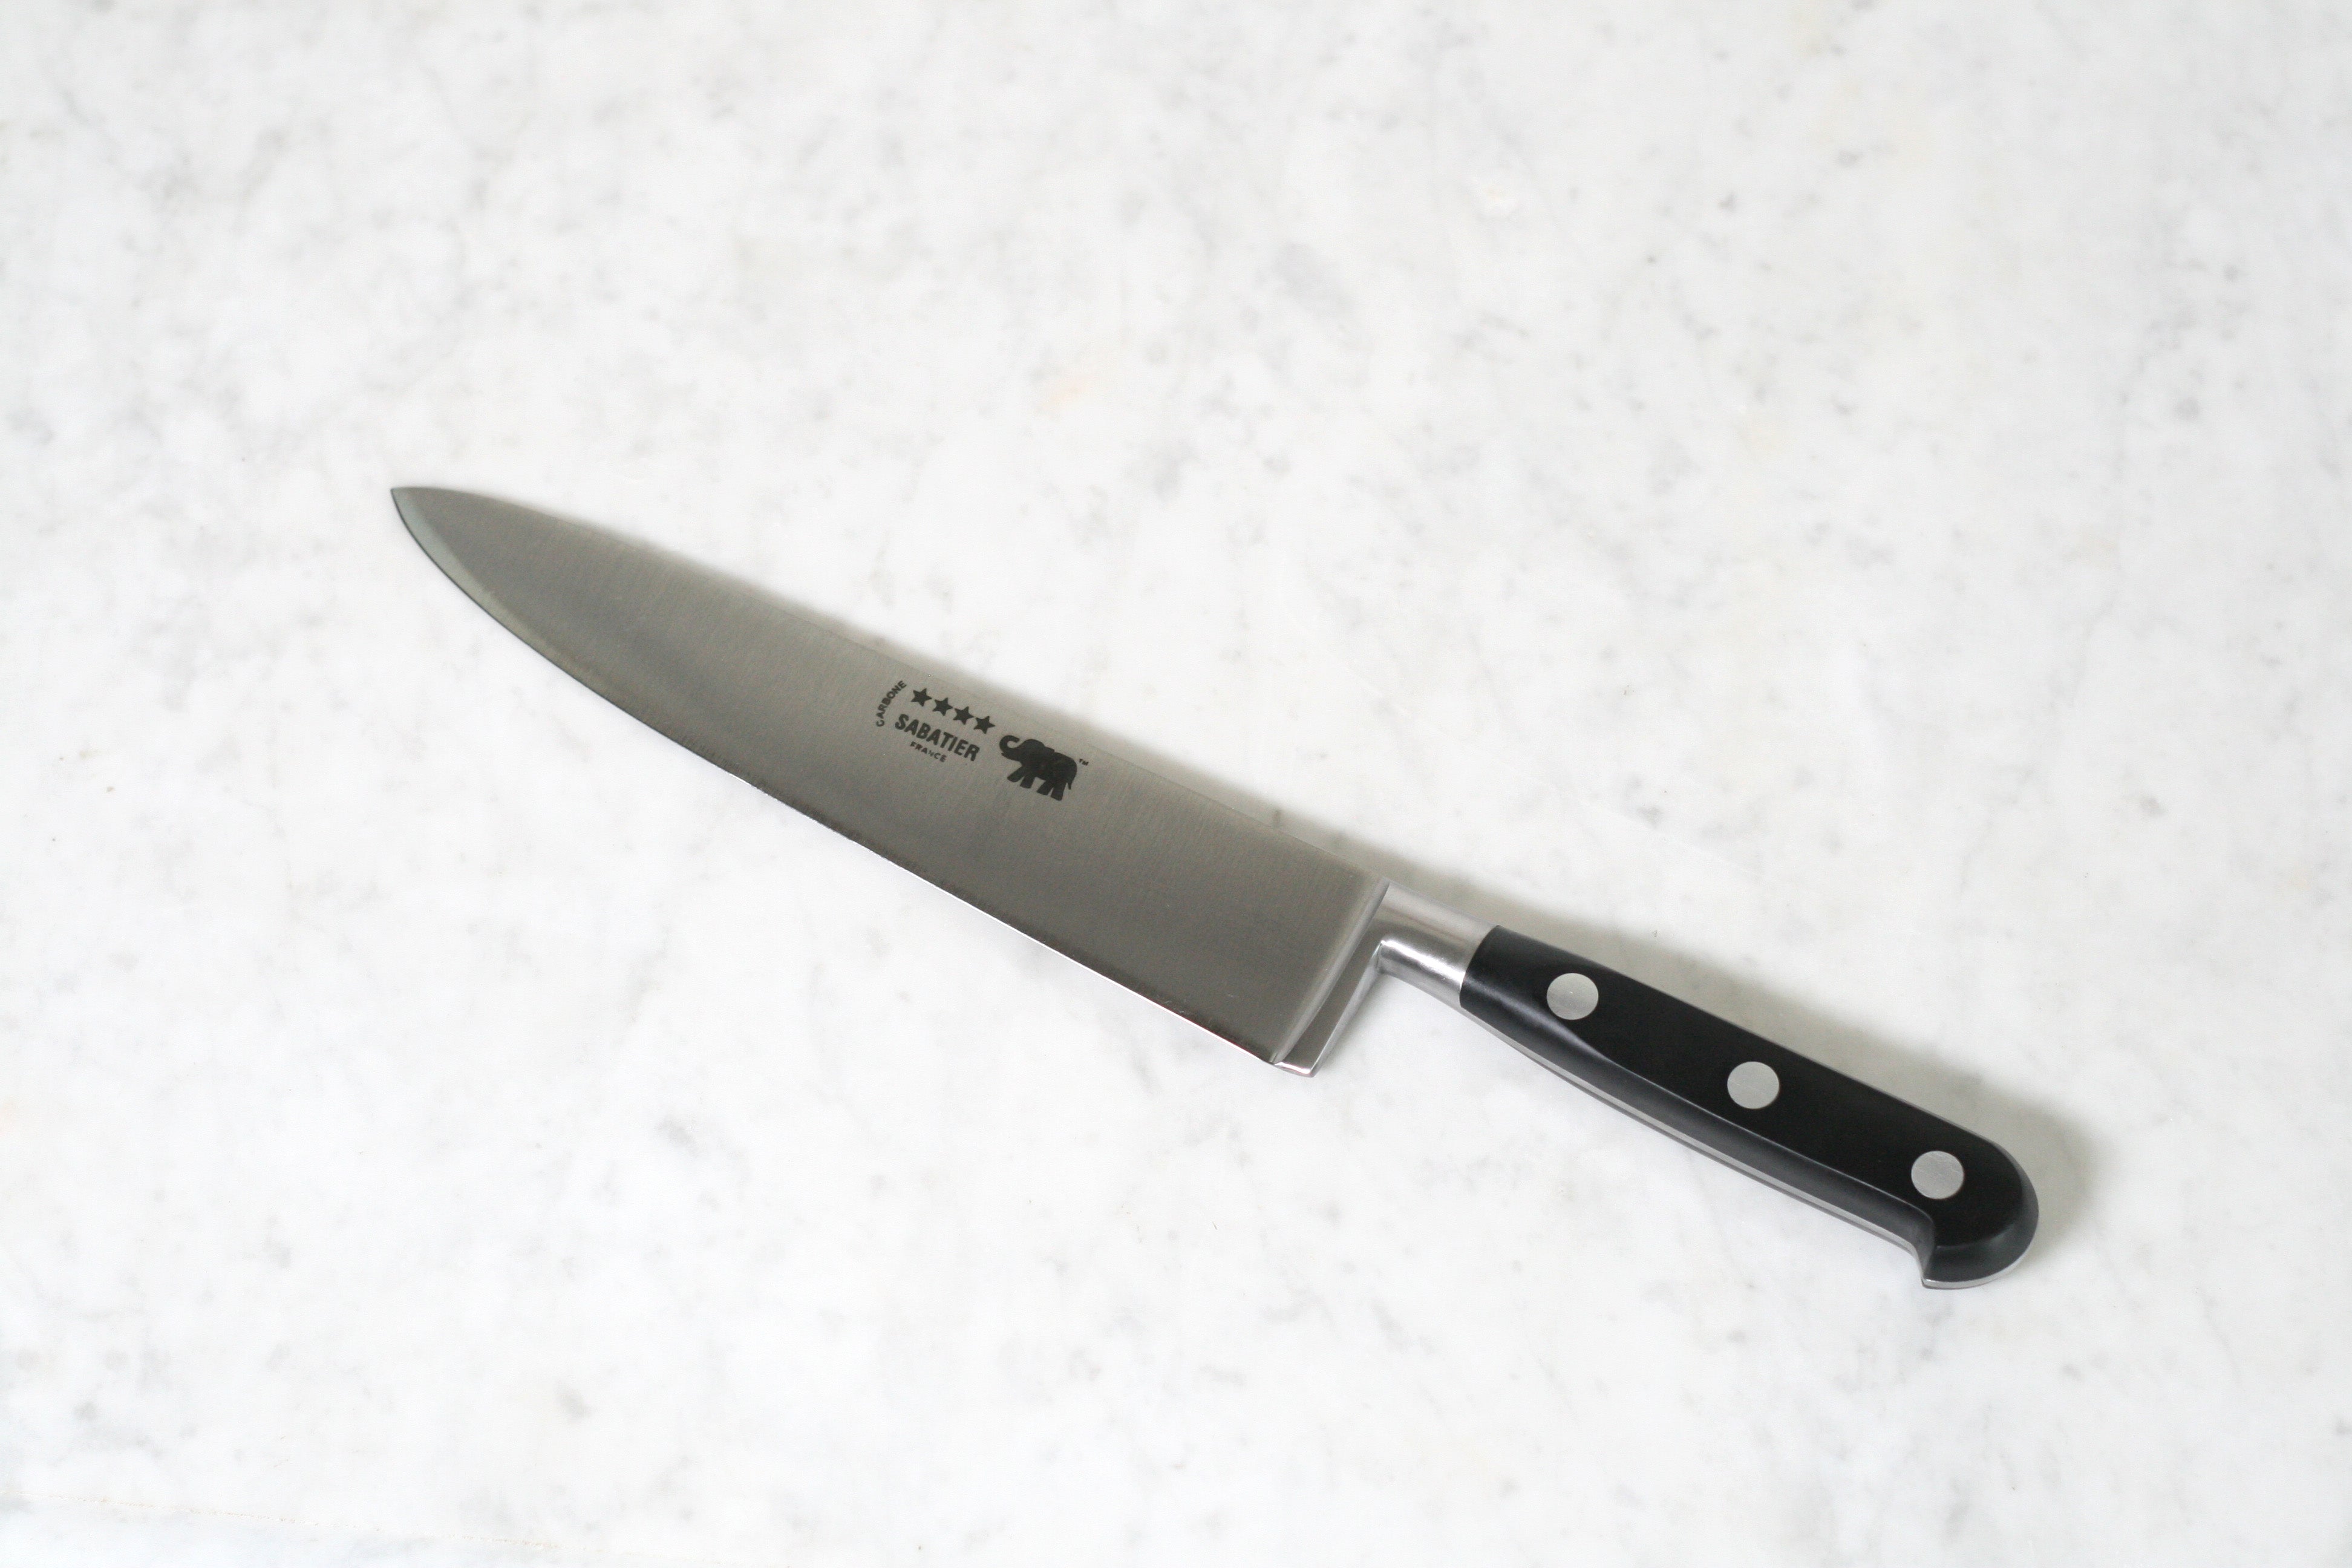 Chef Knife: 8 Inch CARBON